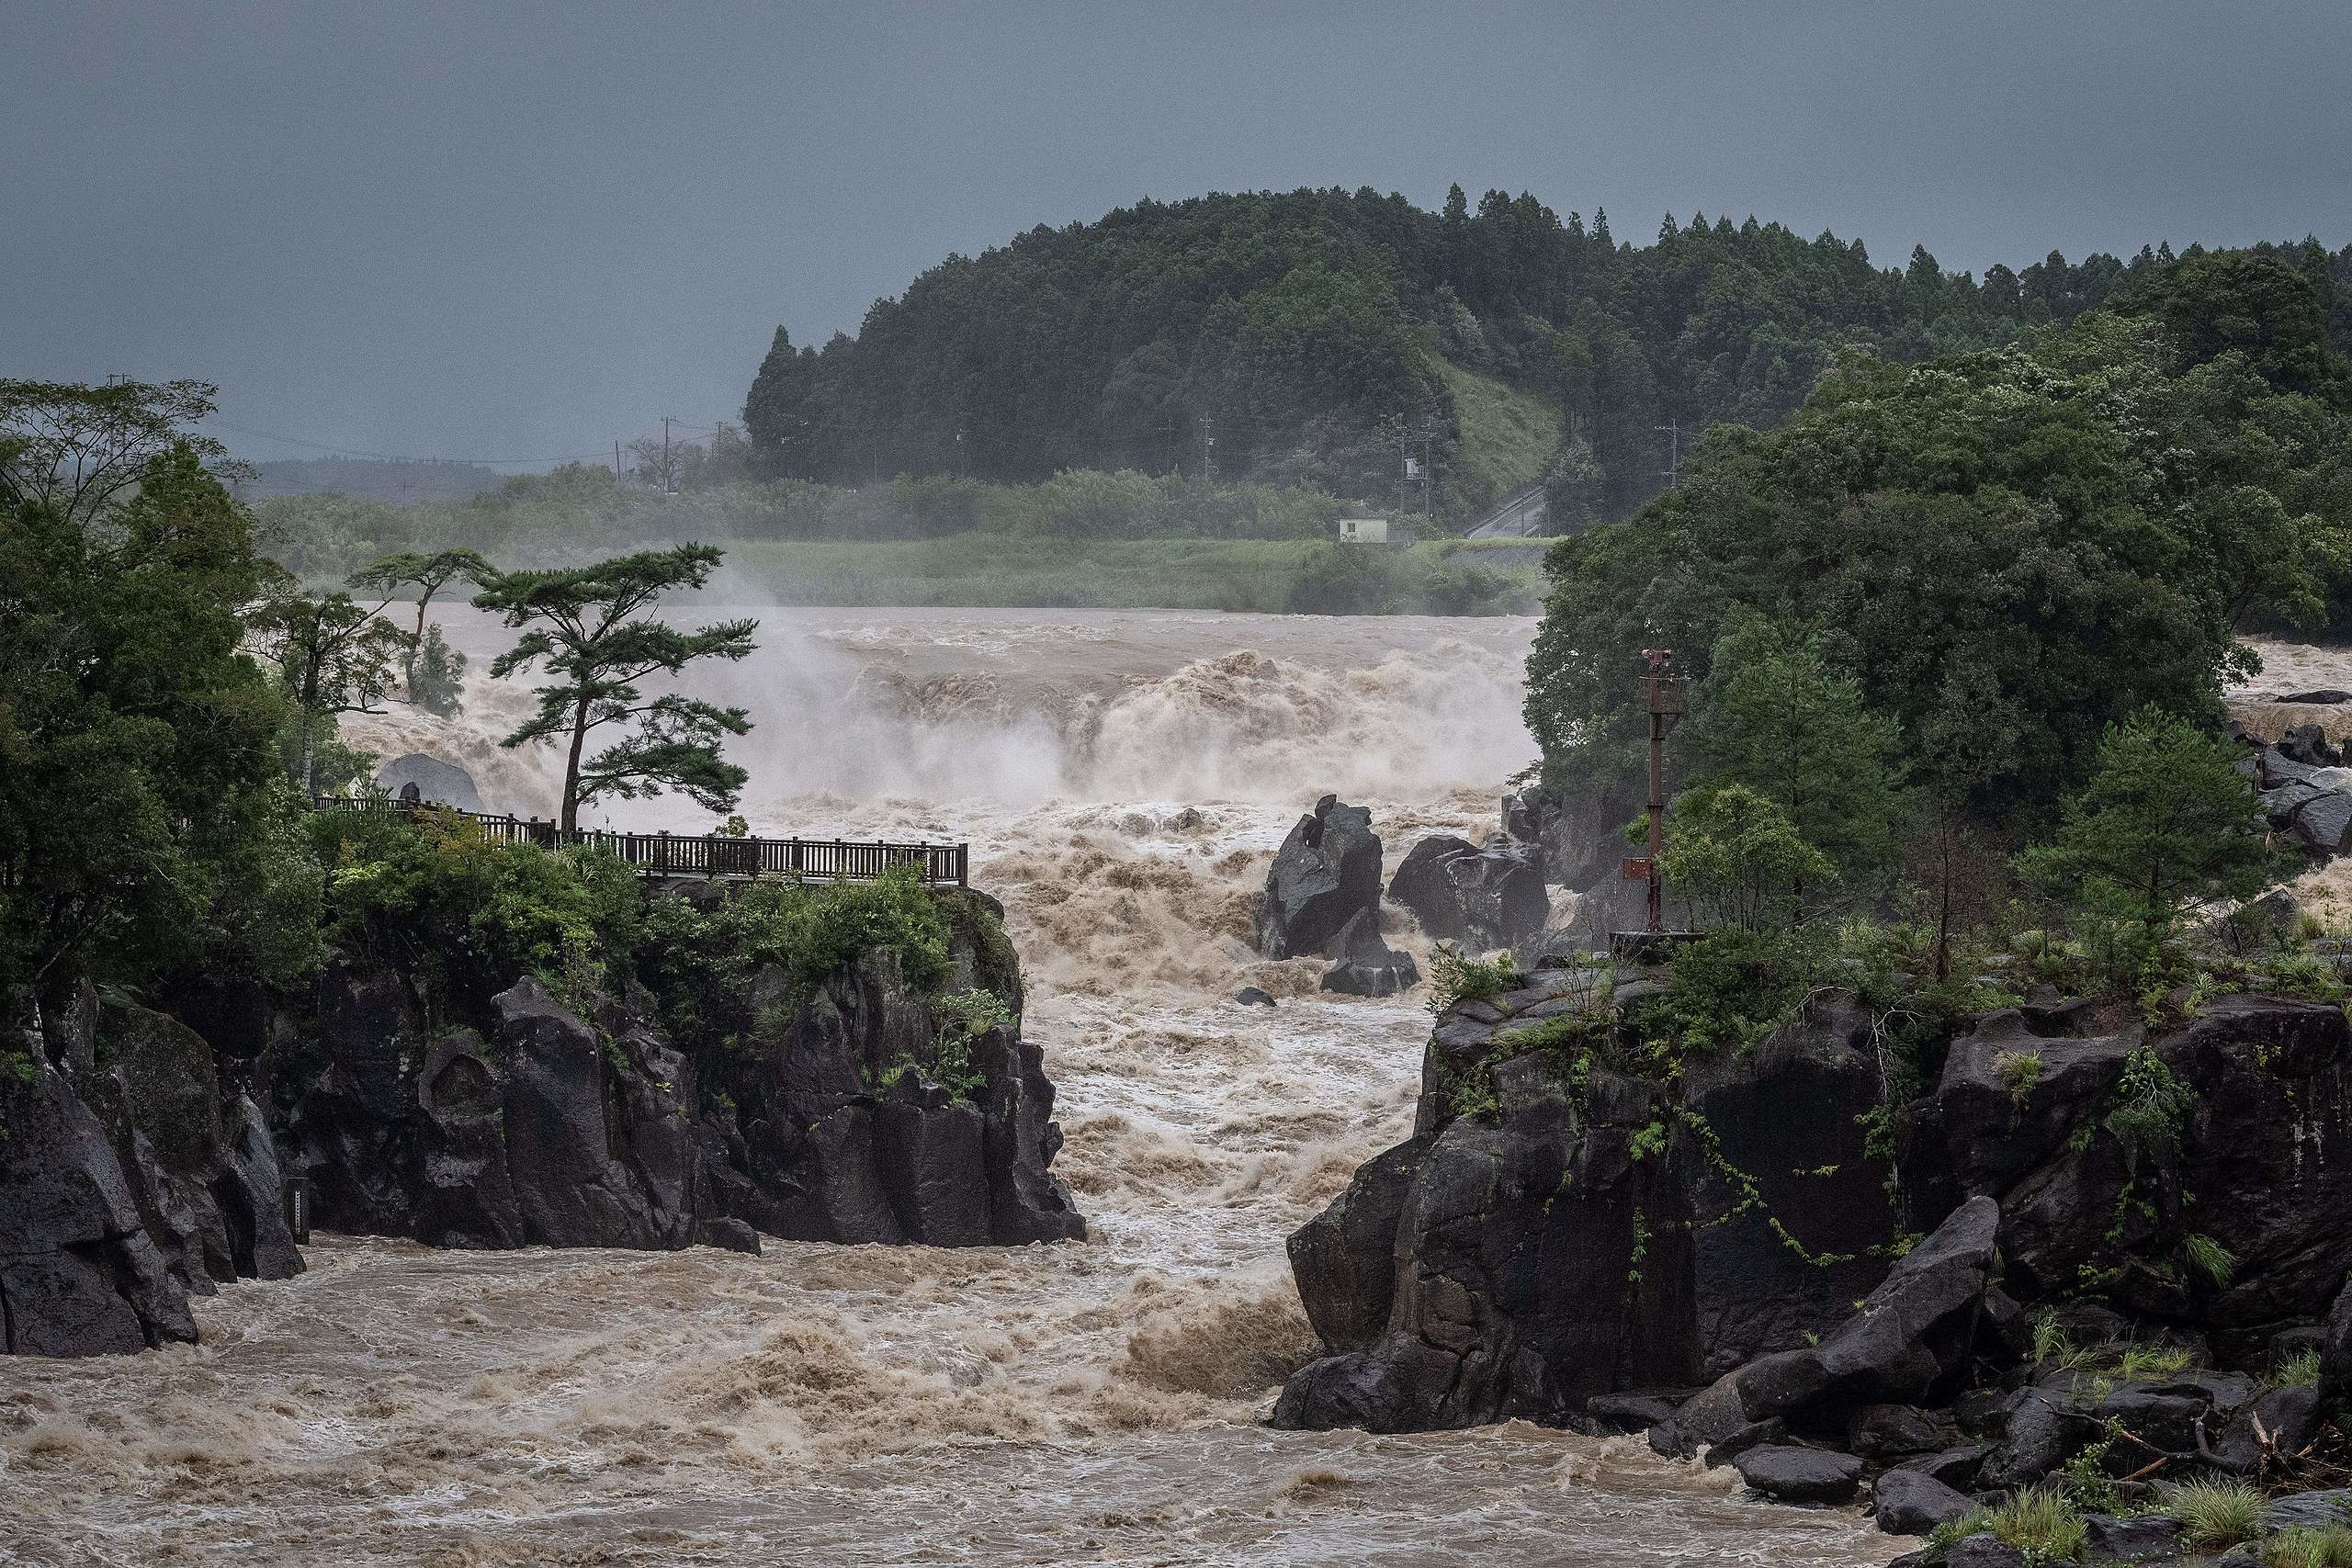 Raging waters flow along the Sendai River in the wake of Typhoon Nanmadol in Isa, Kagoshima prefecture on September 19, 2022. - Typhoon Nanmadol made landfall in southwestern Japan late on September 18, as authorities urged millions of people to take shelter from the powerful storm's high winds and torrential rain. YUICHI YAMAZAKI/AFP via Getty Images